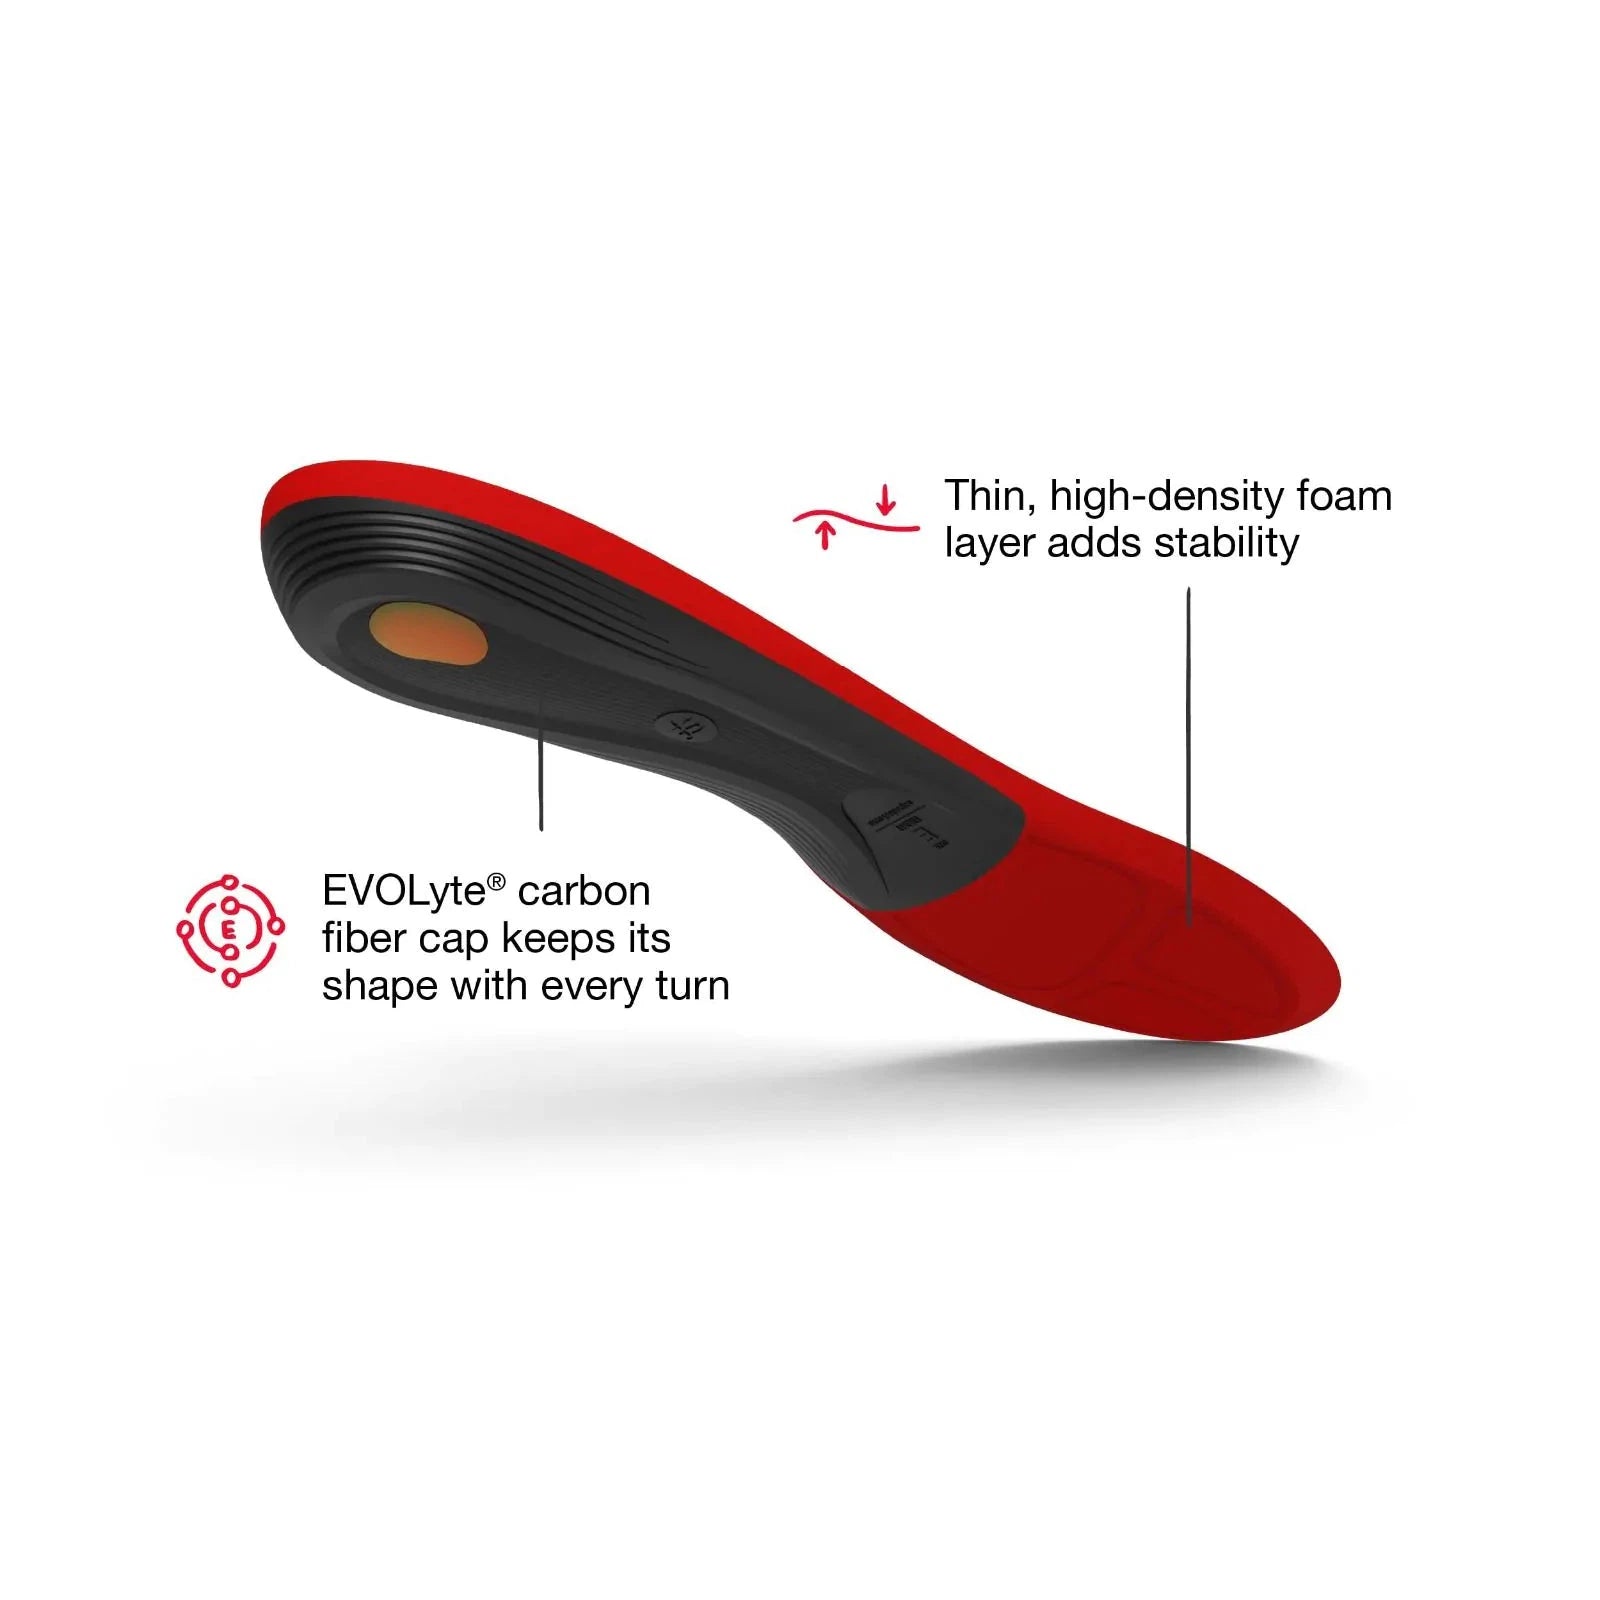 Winter Thin Support Insoles